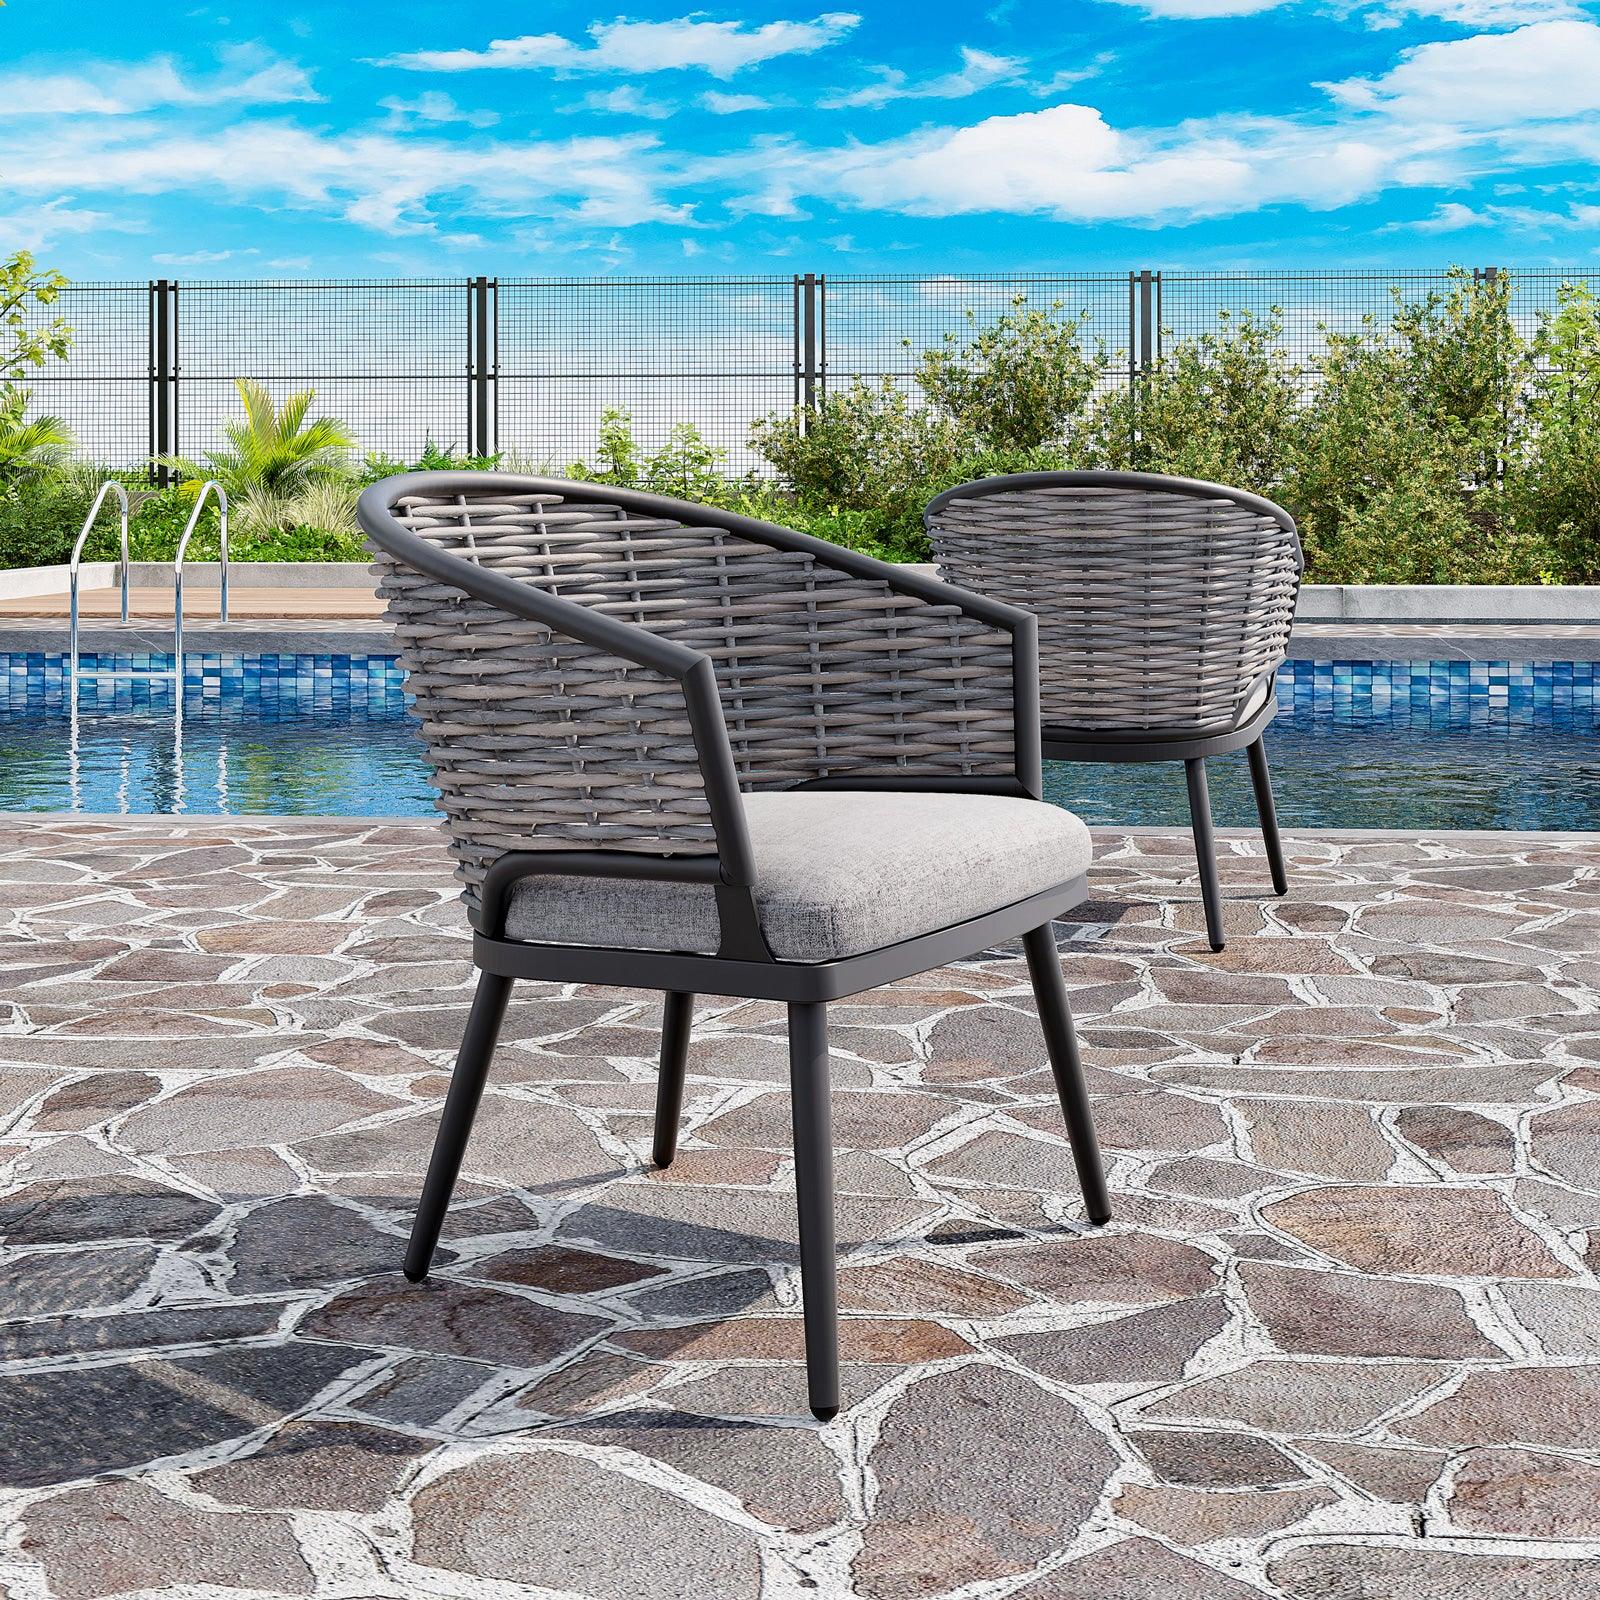 Burano Grey wicker outdoor Dining chairs with aluminum frame, grey cushions, right and back angles- Jardina Furniture#Pieces_2-pc